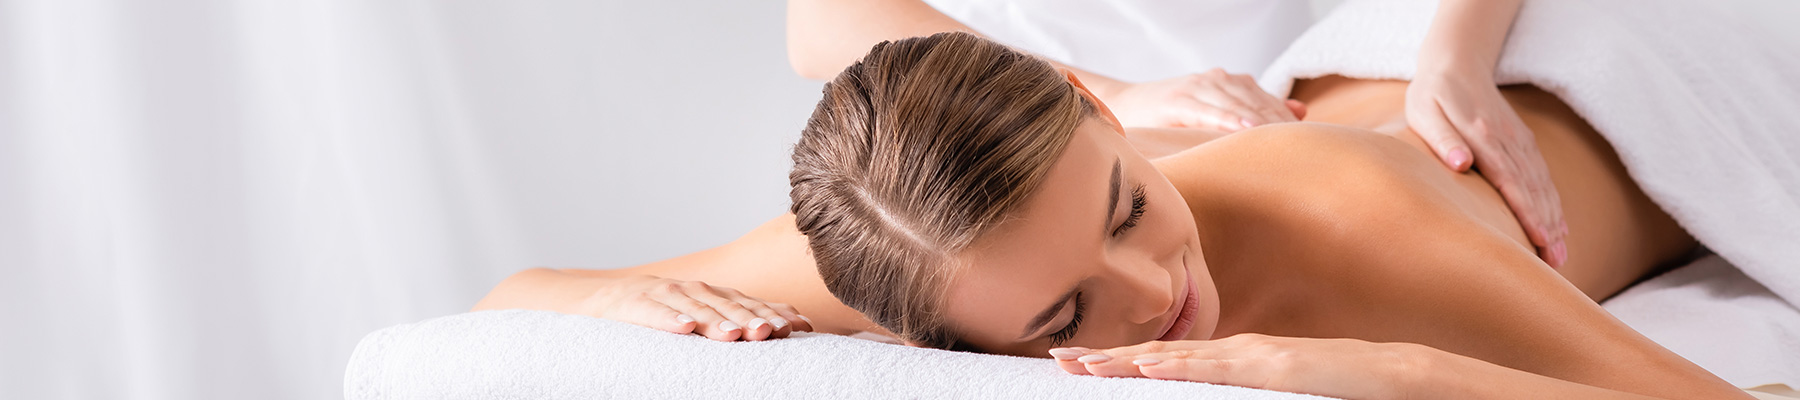 Massage courses in London with Rensam Hairdressing & Beauty Academy